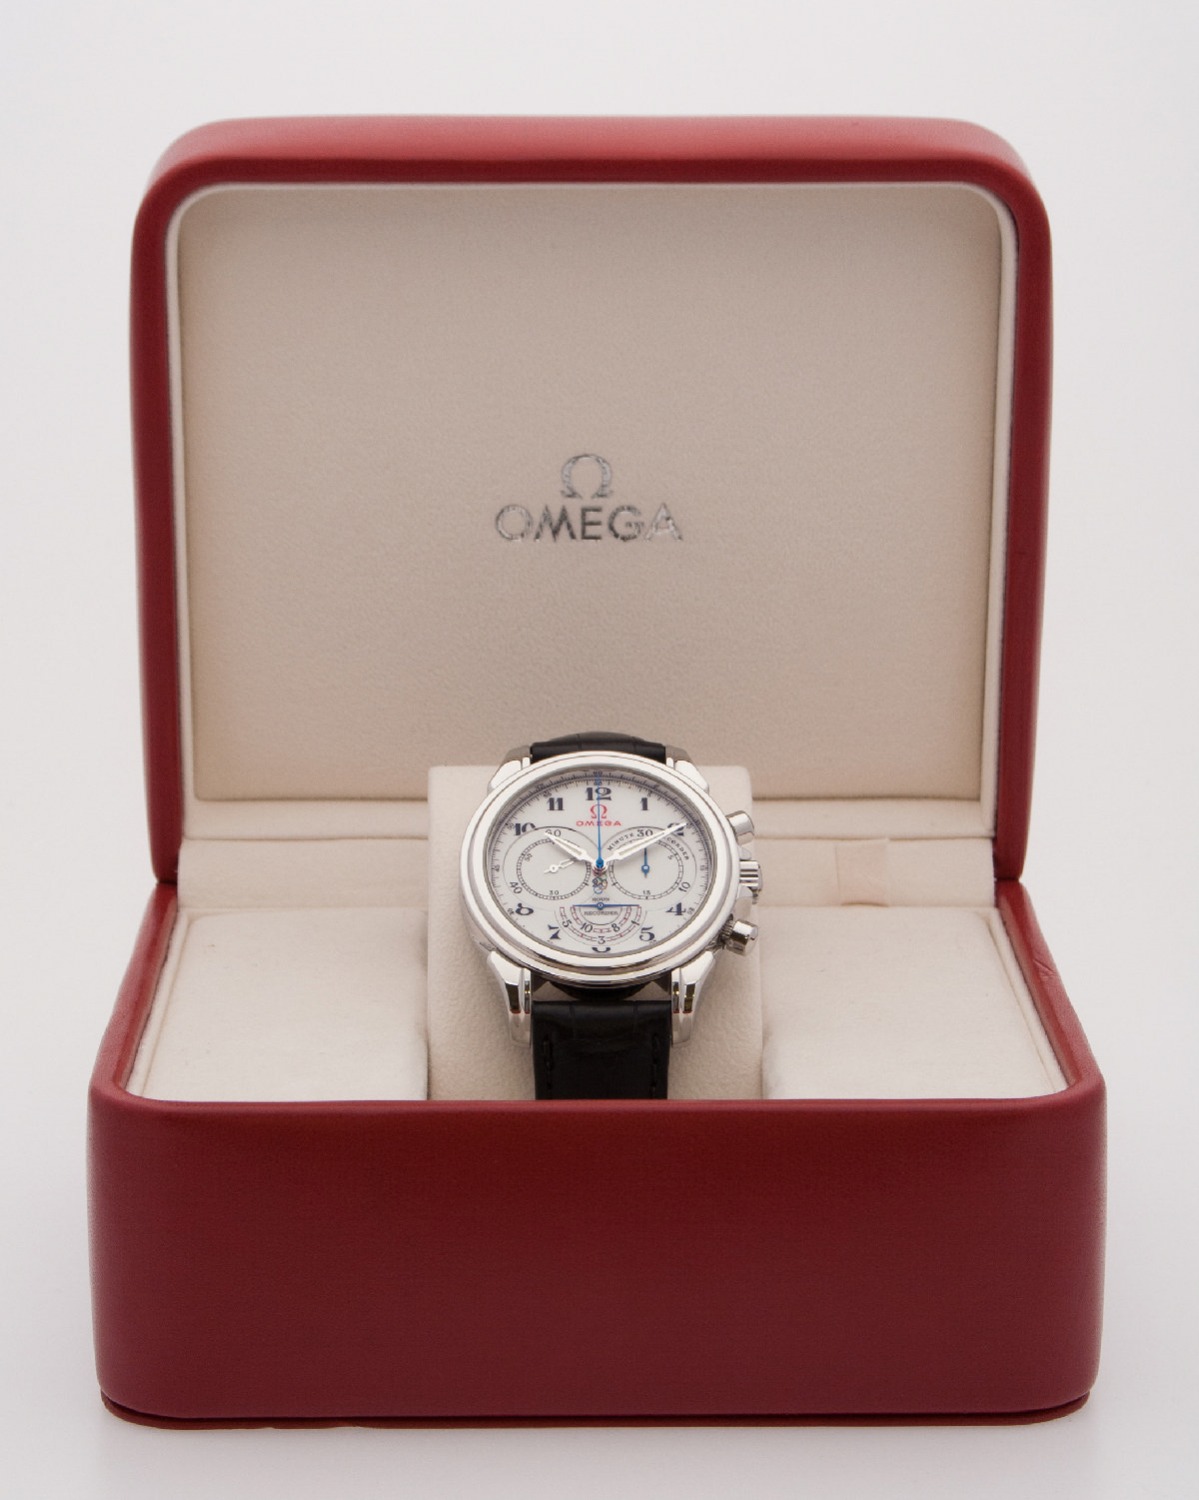 Omega Olympic Co-Axial Chronoscope watch, silver